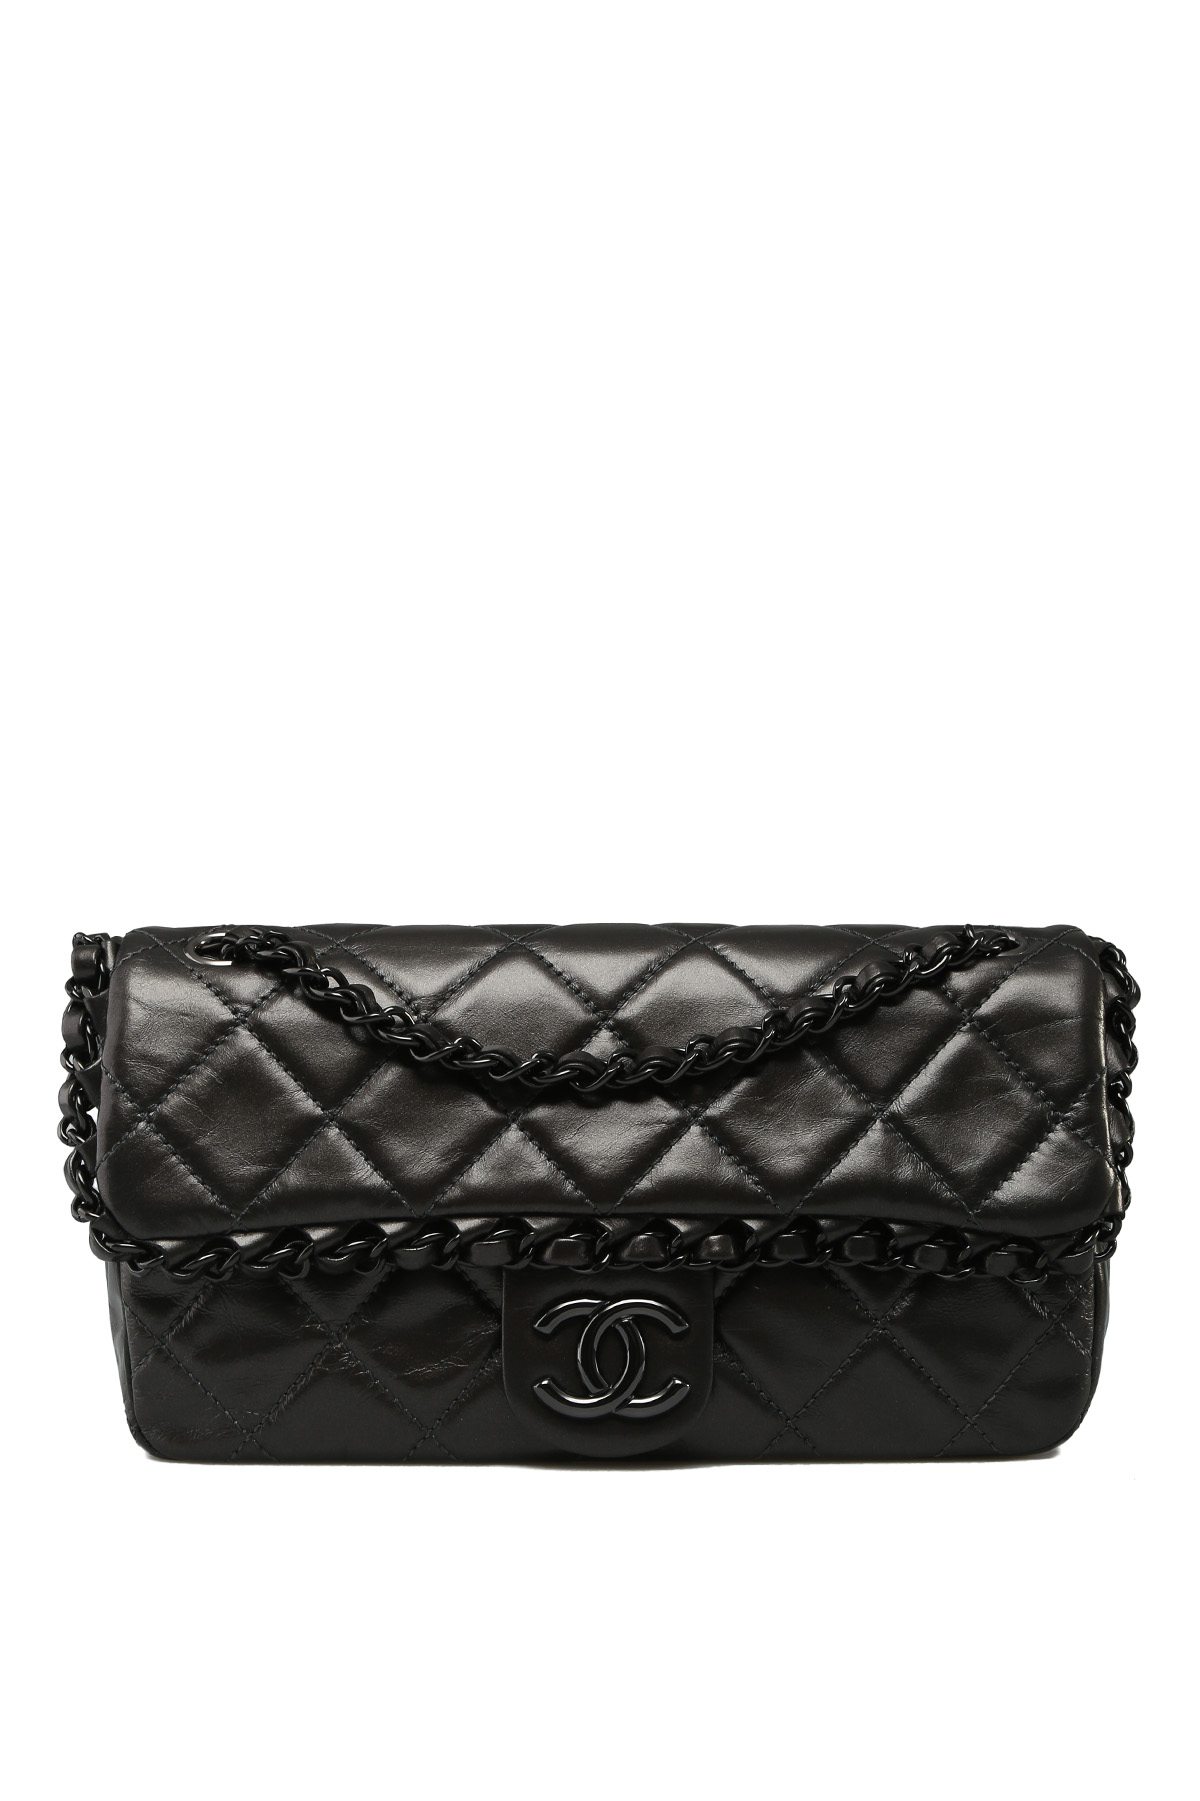 chanel purse white and black